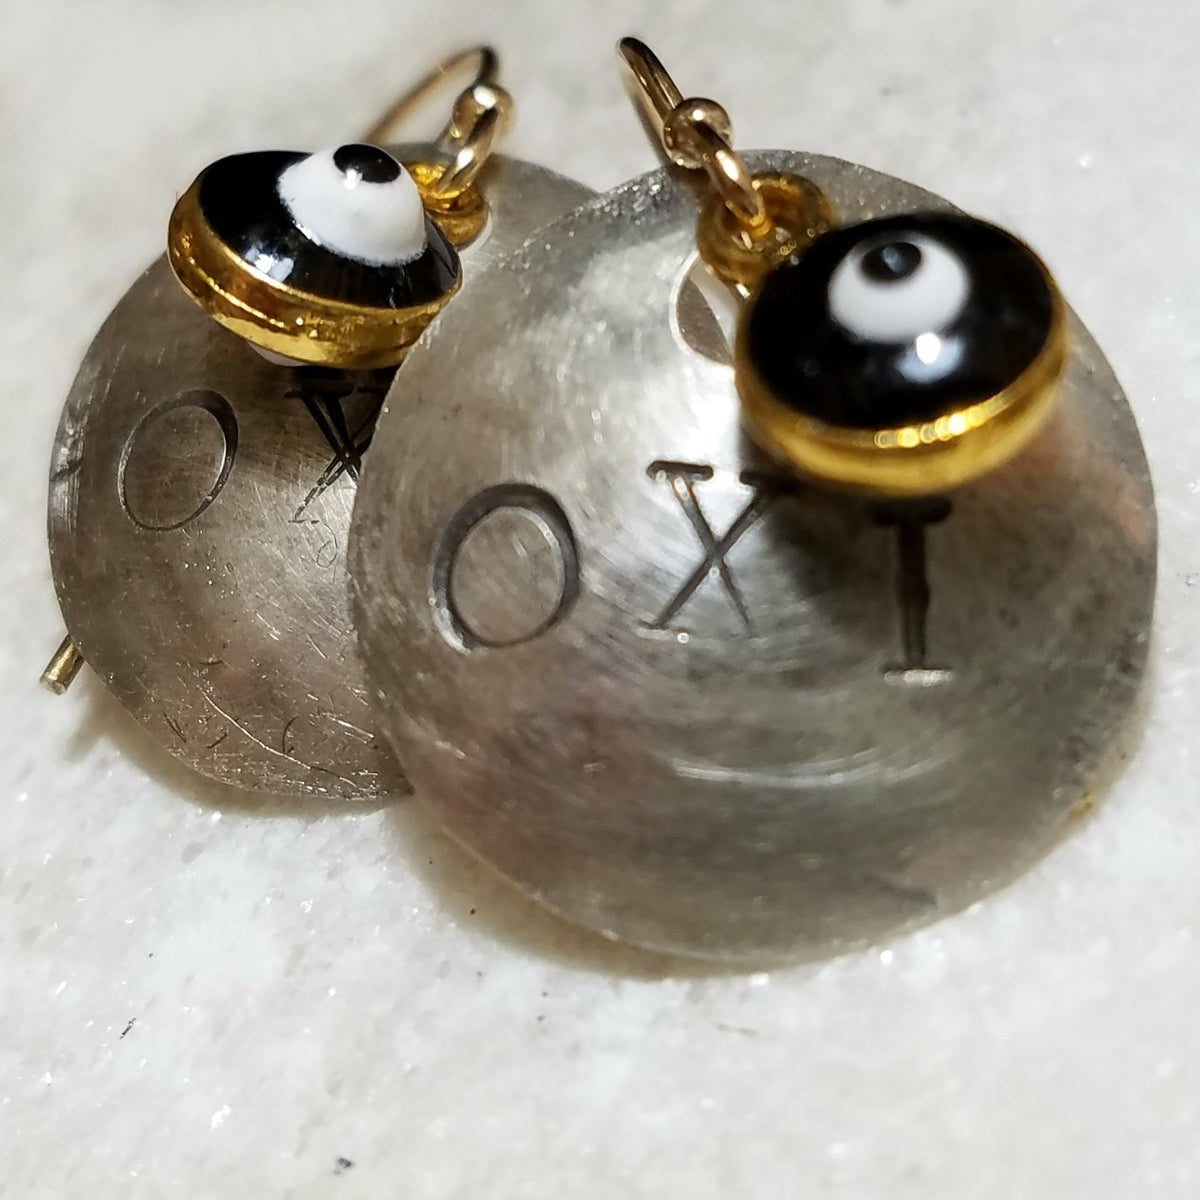 OXI Silver Earrings with Glass Mati on Gold Hooks